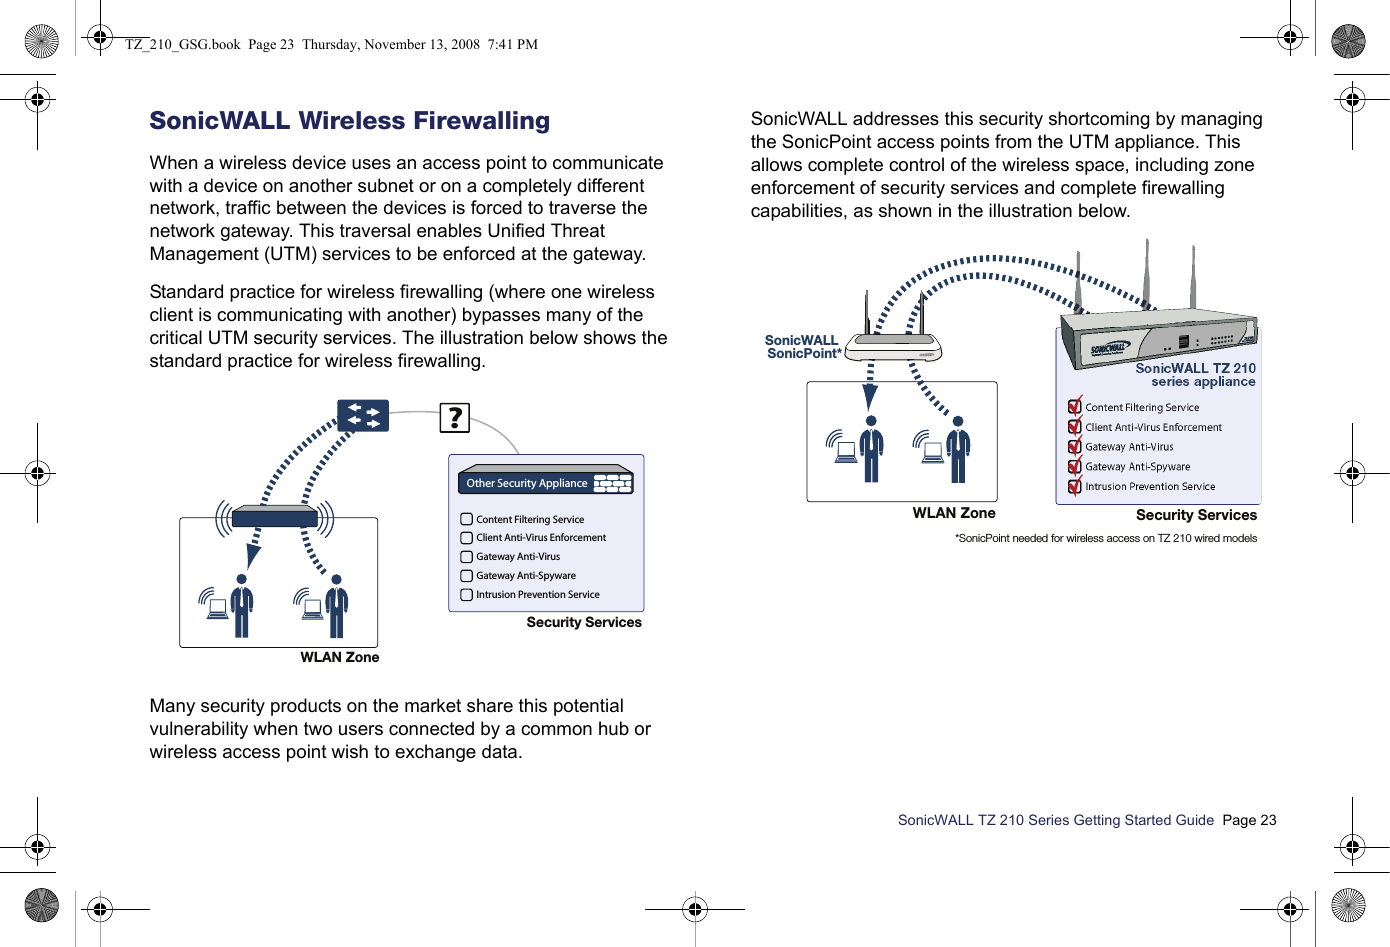 SonicWALL TZ 210 Series Getting Started Guide  Page 23SonicWALL Wireless FirewallingWhen a wireless device uses an access point to communicate with a device on another subnet or on a completely different network, traffic between the devices is forced to traverse the network gateway. This traversal enables Unified Threat Management (UTM) services to be enforced at the gateway.Standard practice for wireless firewalling (where one wireless client is communicating with another) bypasses many of the critical UTM security services. The illustration below shows the standard practice for wireless firewalling. Many security products on the market share this potential vulnerability when two users connected by a common hub or wireless access point wish to exchange data.SonicWALL addresses this security shortcoming by managing the SonicPoint access points from the UTM appliance. This allows complete control of the wireless space, including zone enforcement of security services and complete firewalling capabilities, as shown in the illustration below.WLAN ZoneSecurity Services?Content Filtering ServiceClient Anti-Virus EnforcementGateway Anti-VirusGateway Anti-SpywareIntrusion Prevention ServiceOther Security ApplianceWLAN Zone Security ServicesSonicWALL TZ 210series applianceSonicWALL SonicPoint**SonicPoint needed for wireless access on TZ 210 wired modelsContent Filtering ServiceClient Anti-Virus EnforcementGateway Anti-VirusGateway Anti-SpywareIntrusion Prevention ServiceSONICPOINTTZ_210_GSG.book  Page 23  Thursday, November 13, 2008  7:41 PM